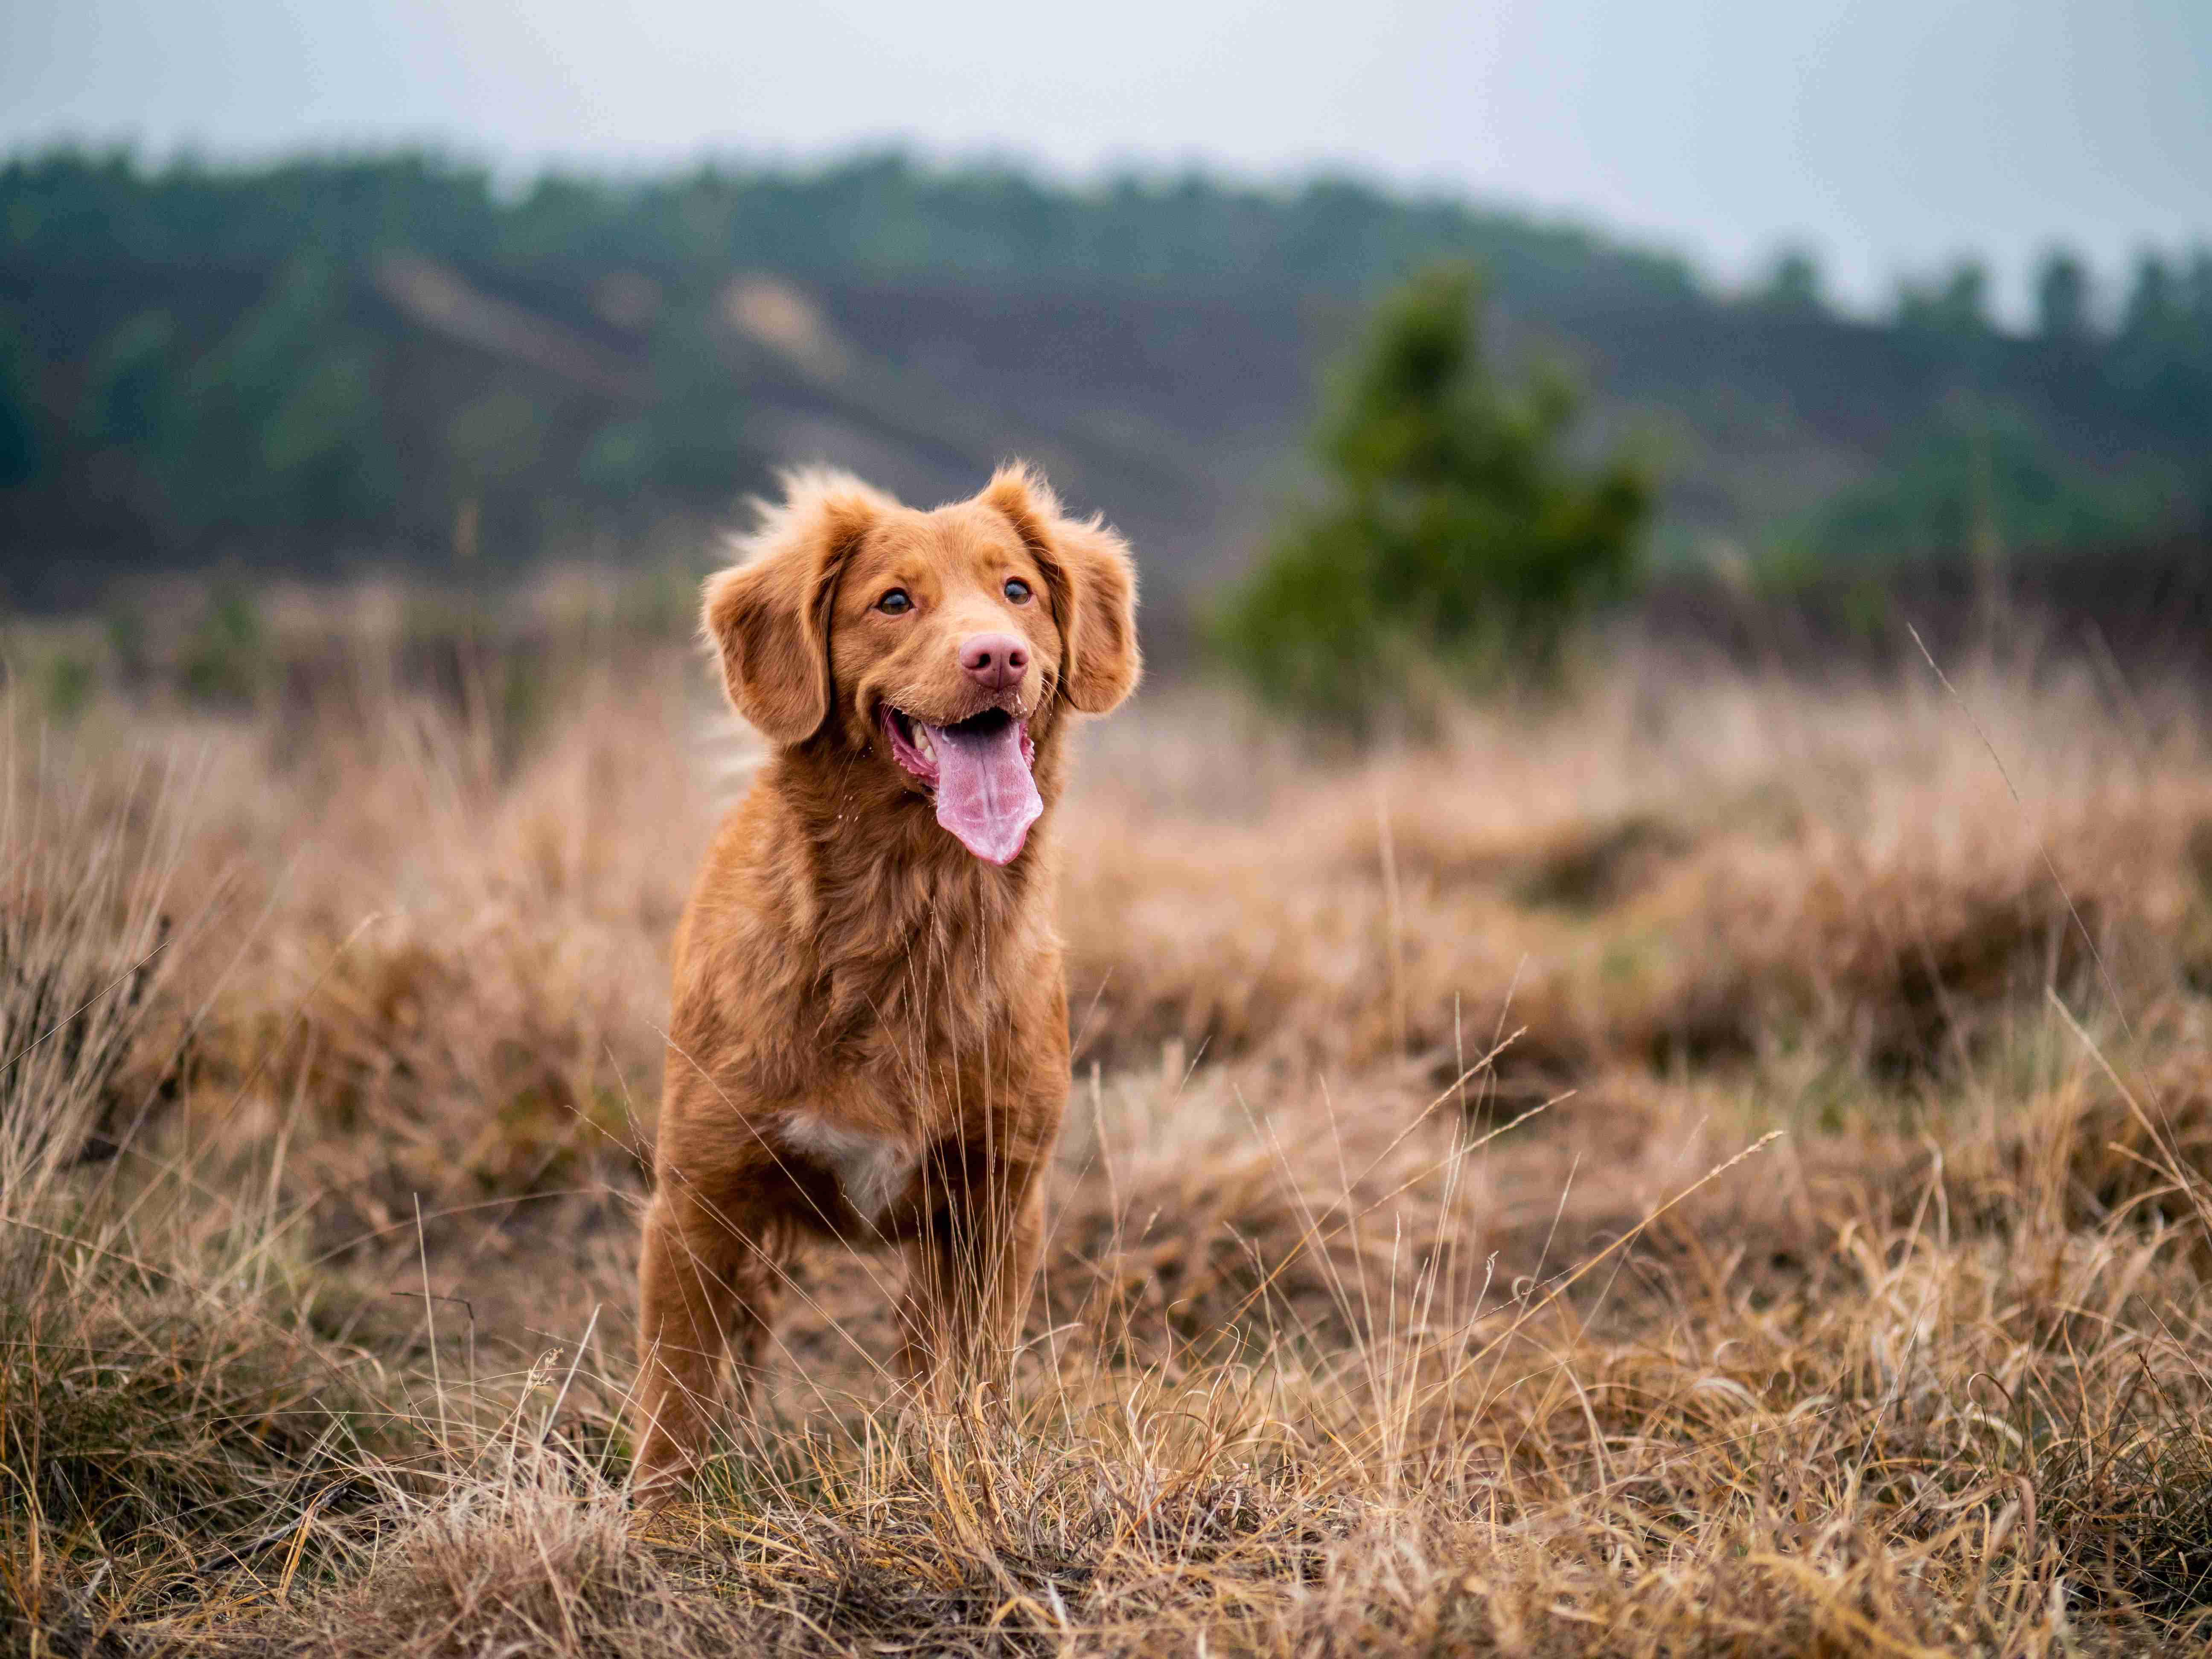 Fun and Furry: Involving Your Golden Retriever in Family Hobbies and Interests